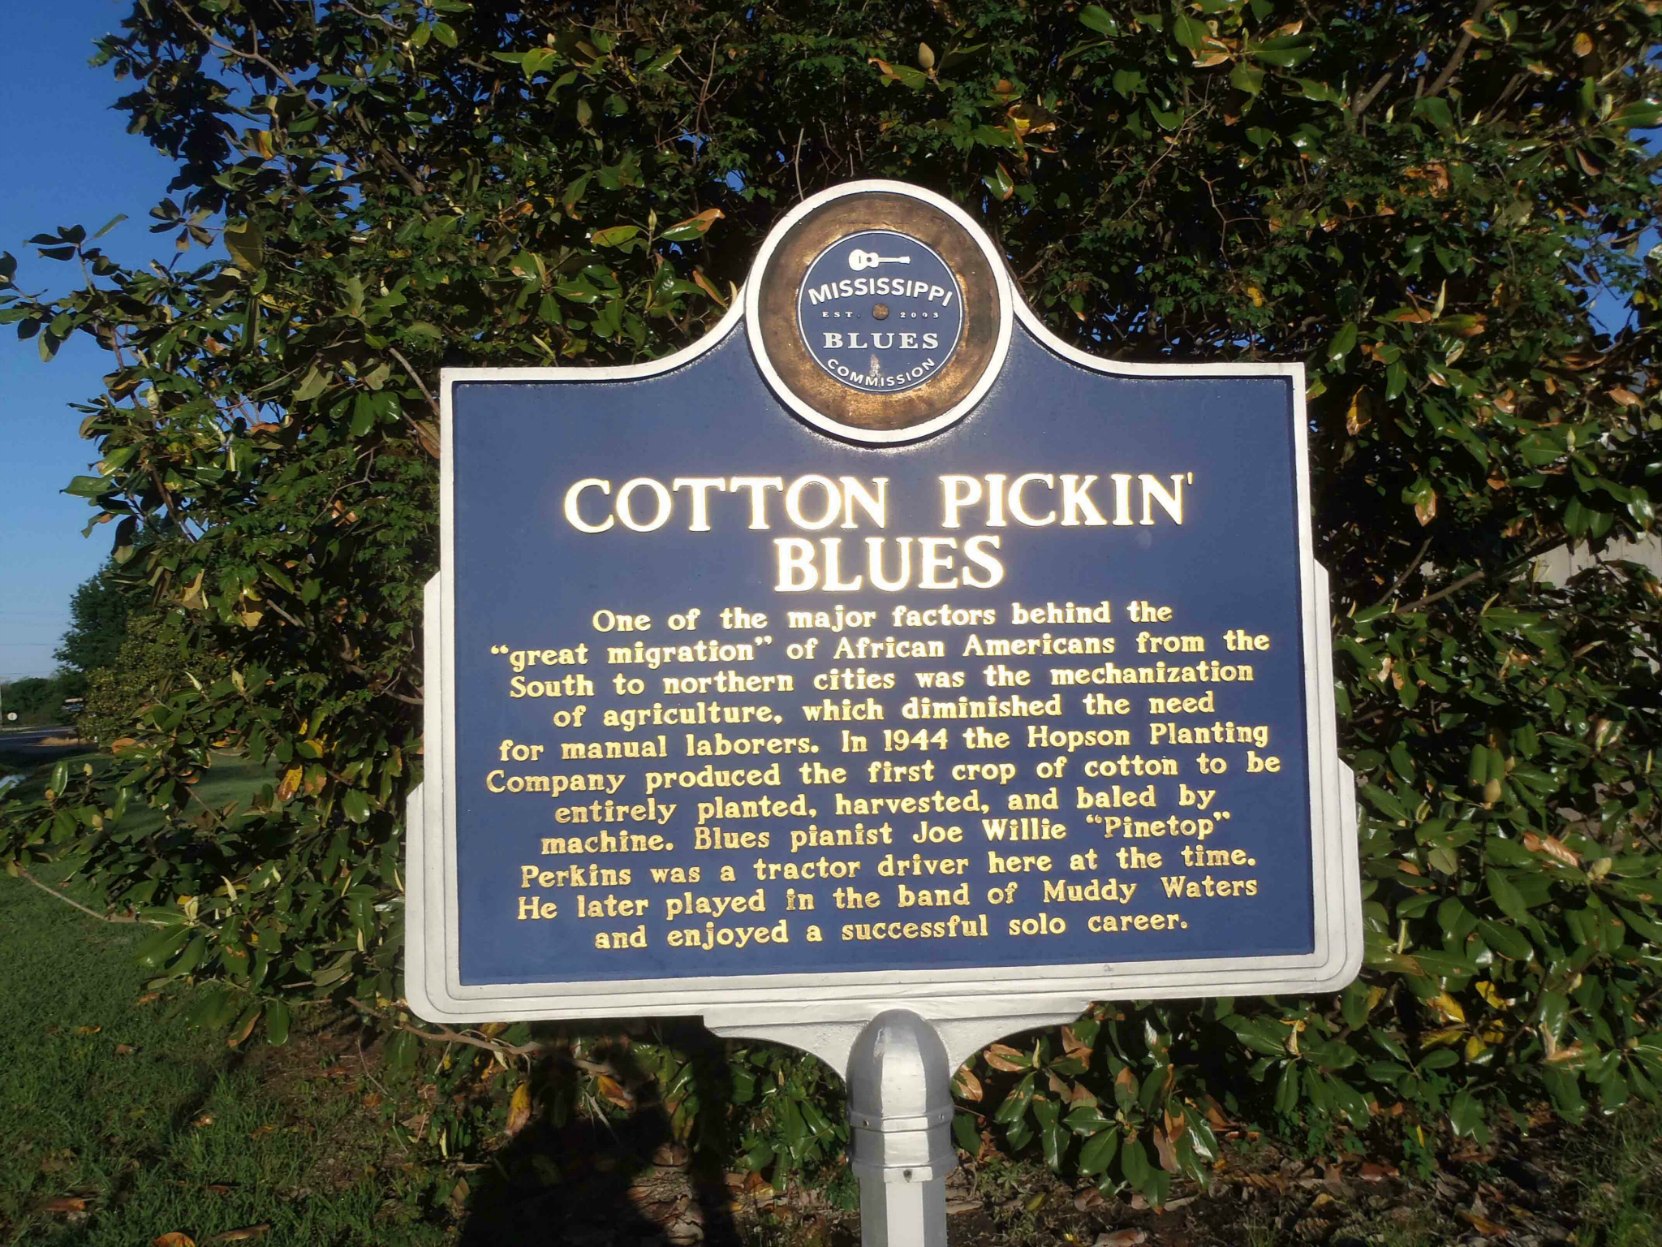 Mississippi Blues Trail marker for Cotton Pickin' Blues, Hopson Farm, Highway 49, Coahoma County, Mississippi.